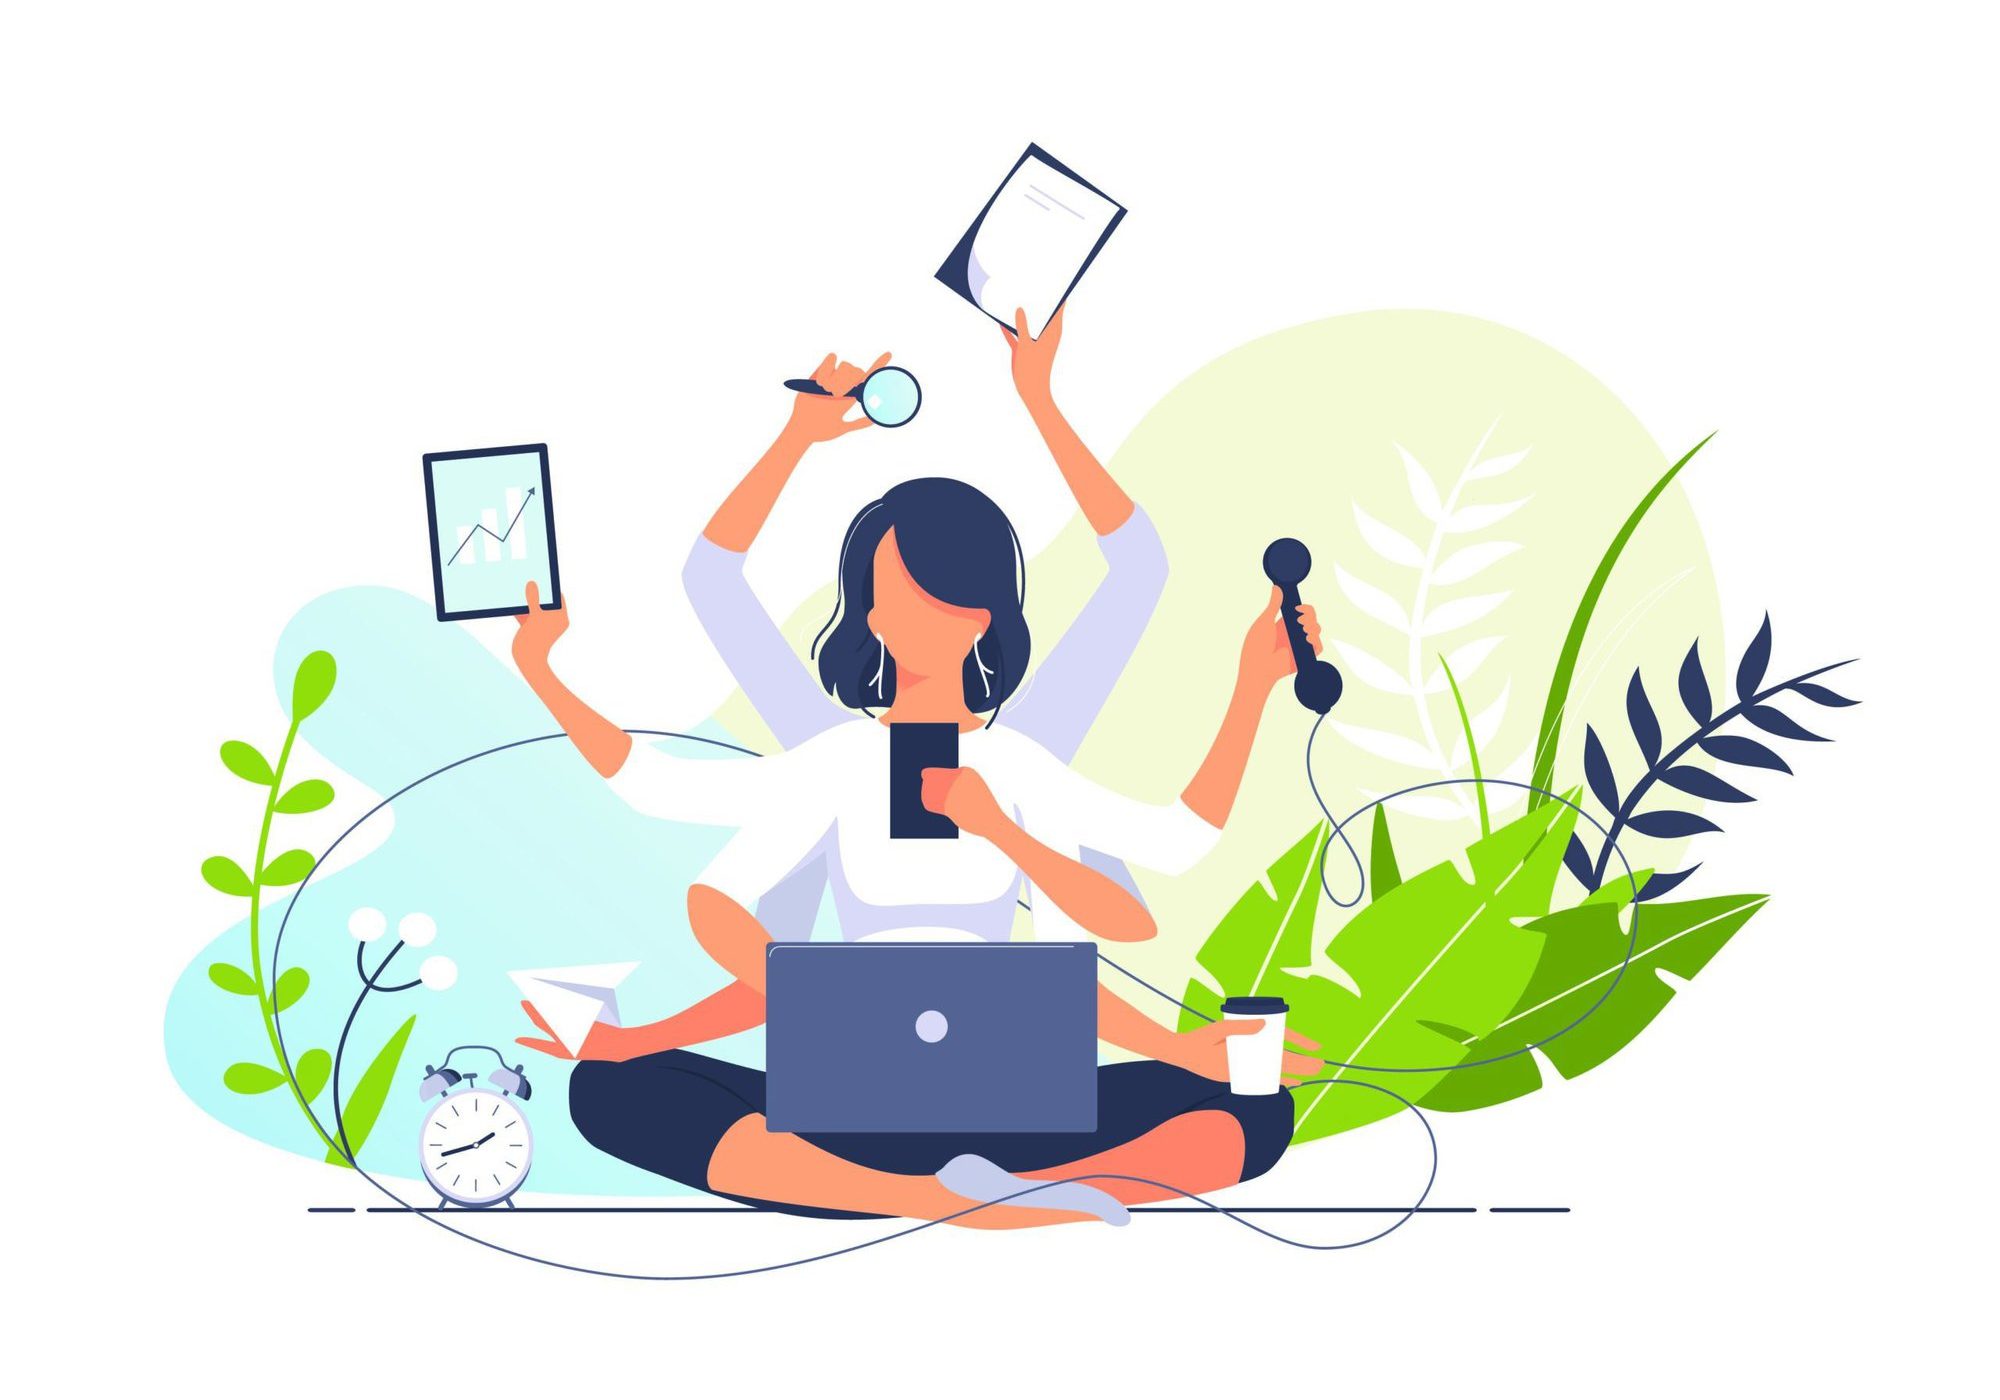 Vector illustration concept of business woman practicing meditation in office. The girl sits in the lotus position, the thought process, the inception and the search for ideas. Practicing Yoga in work. Time management